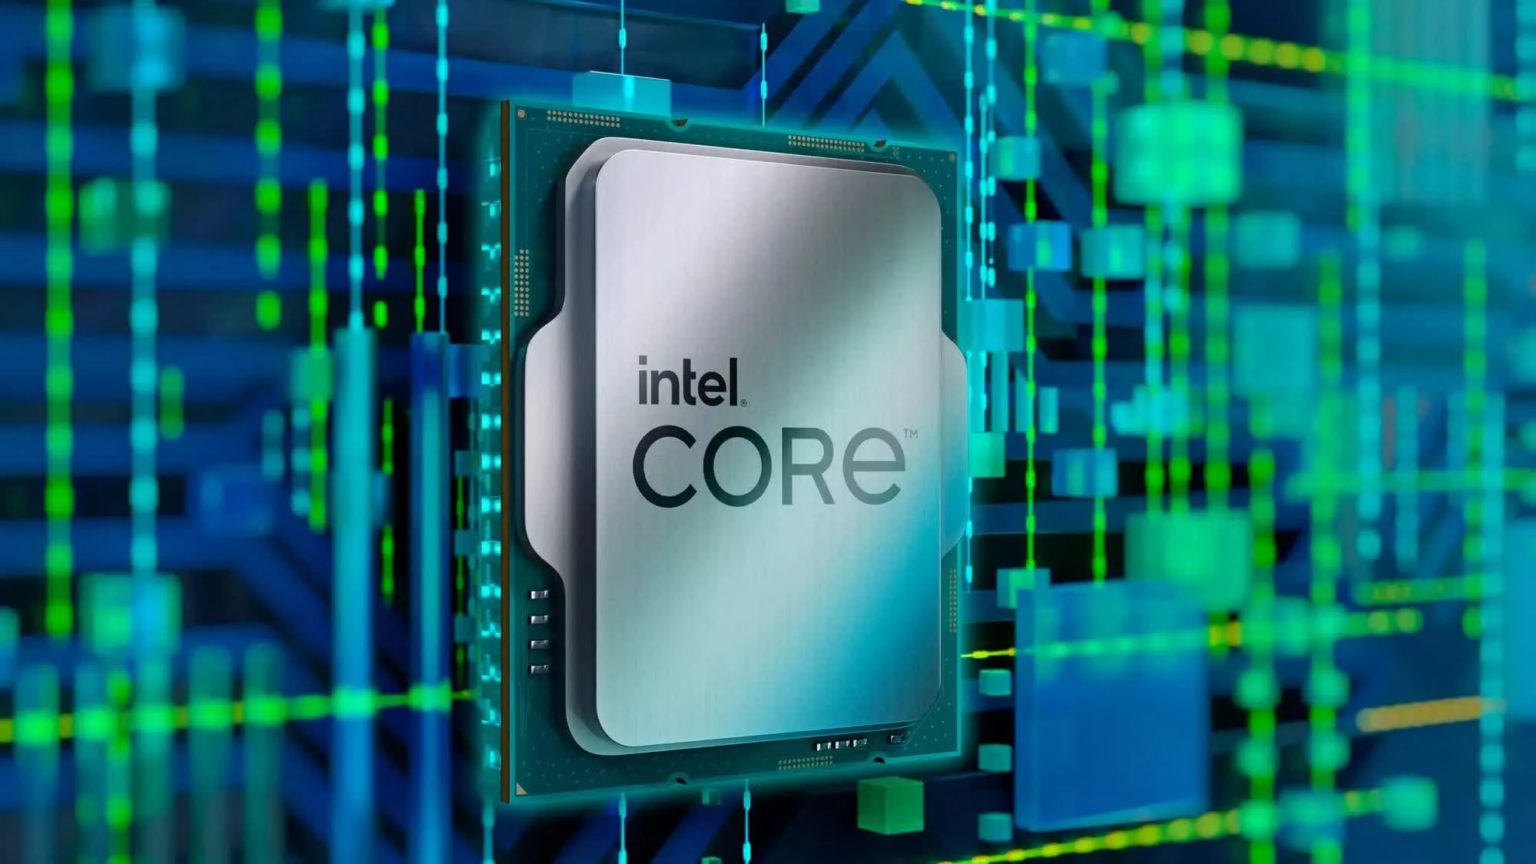 Intel may be working on new Bartlett Lake-S budget CPUs for the LGA 1700 platform